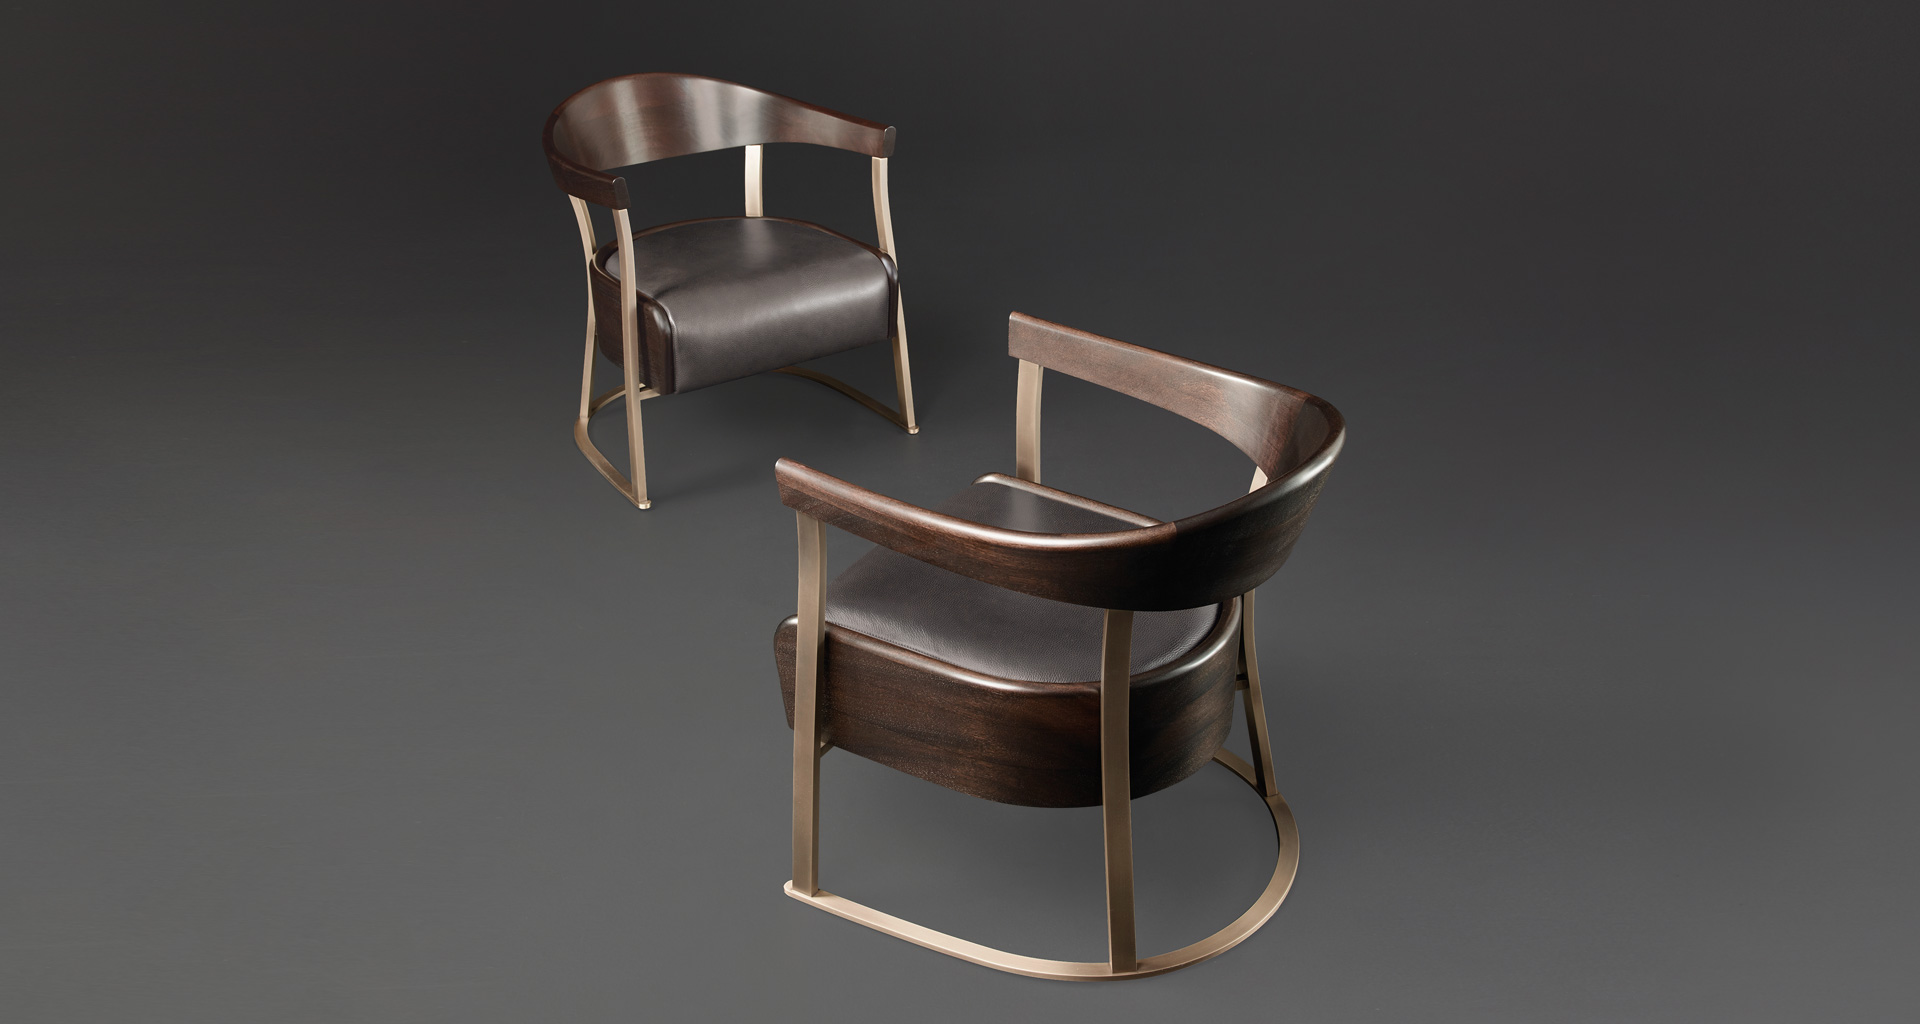 Rachele is a bronze armchair covered in leather, from Promemoria's catalogue | Promemoria